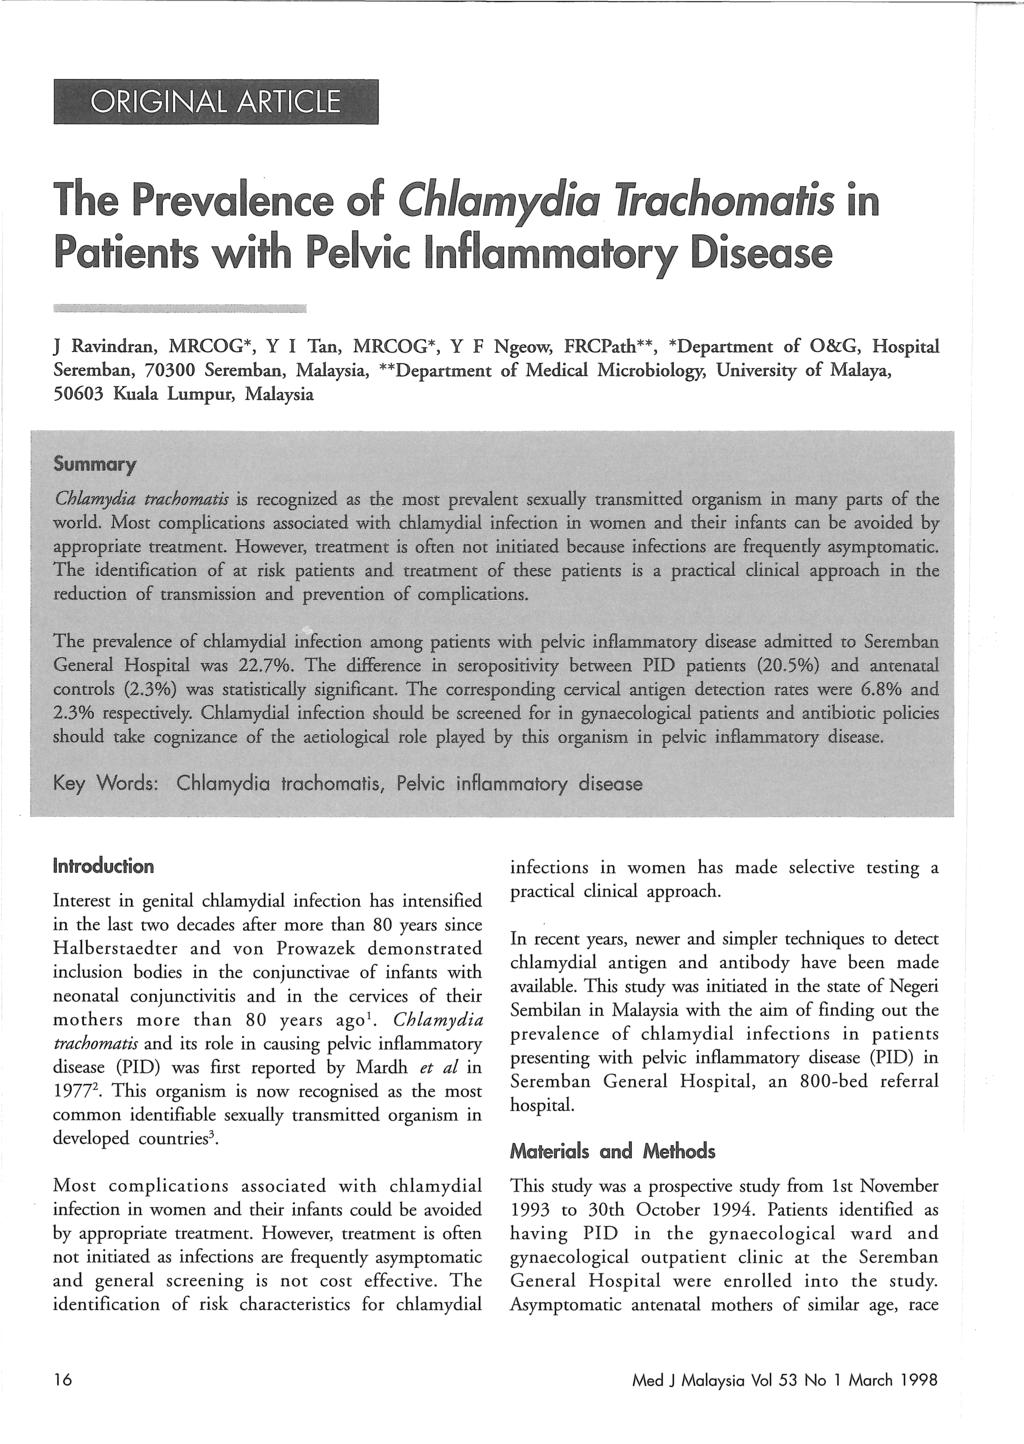 The Prevalence of Chlamydia Trachomatis in Patients with Pelvic Inflammatory Disease J Ravindran, MRCOG*, Y I Tan, MRCOG*, Y F Ngeow, FRCPath**, *Department of O&G, Hospital Seremban, 70300 Seremban,